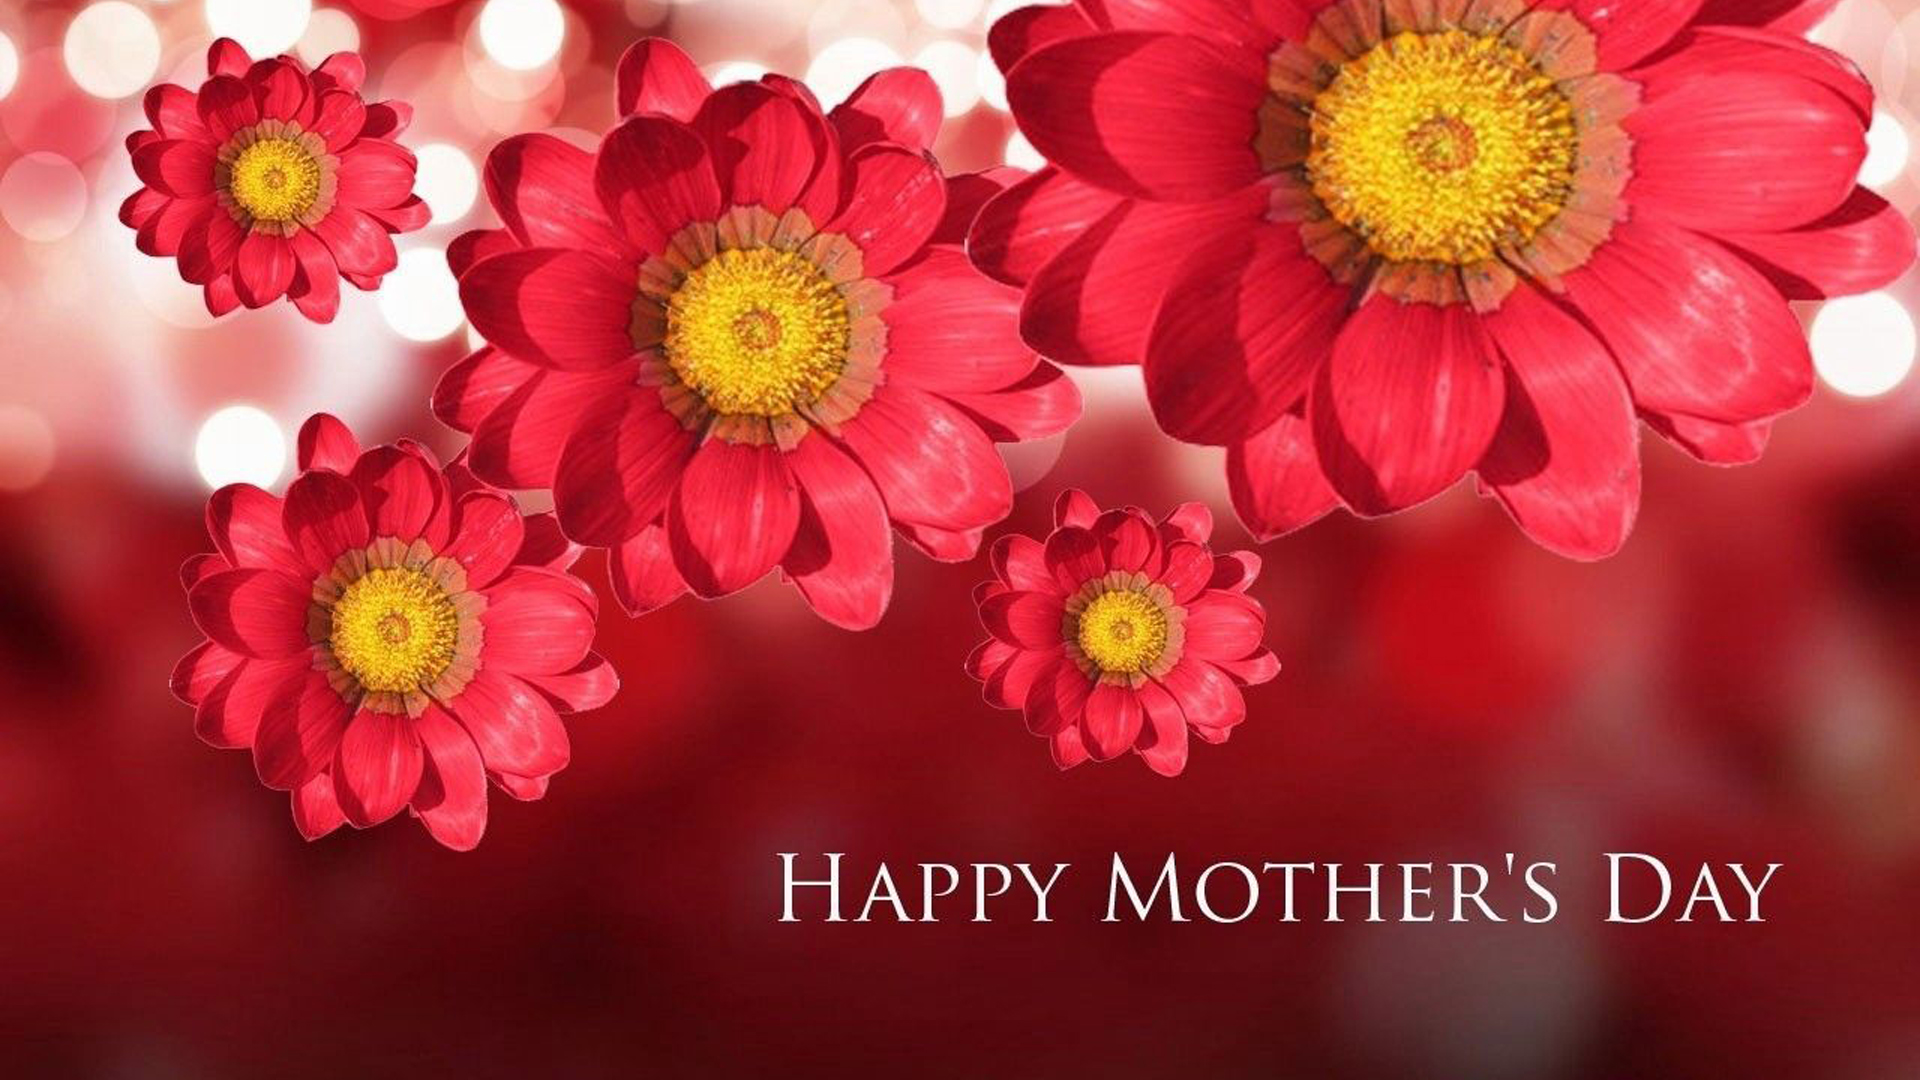 Happy Mother’s Day Word In Red Flowers Wallpaper HD Happy Mother’s Day